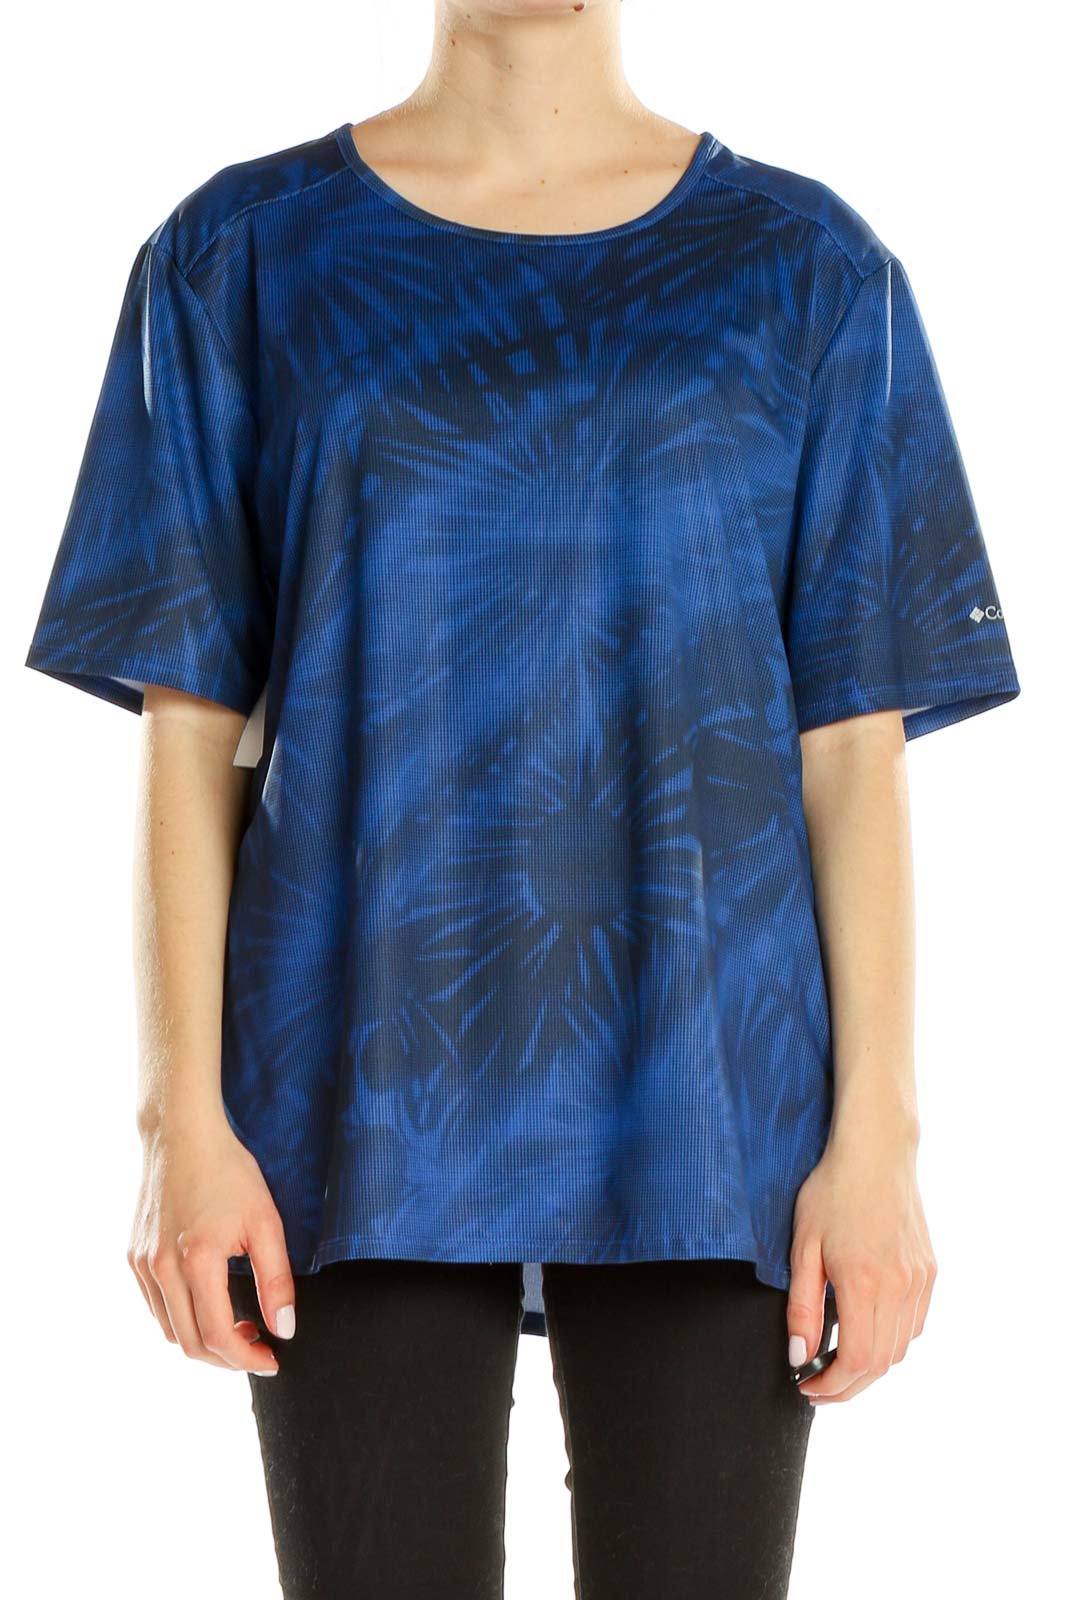 Blue Printed T-Shirt Front